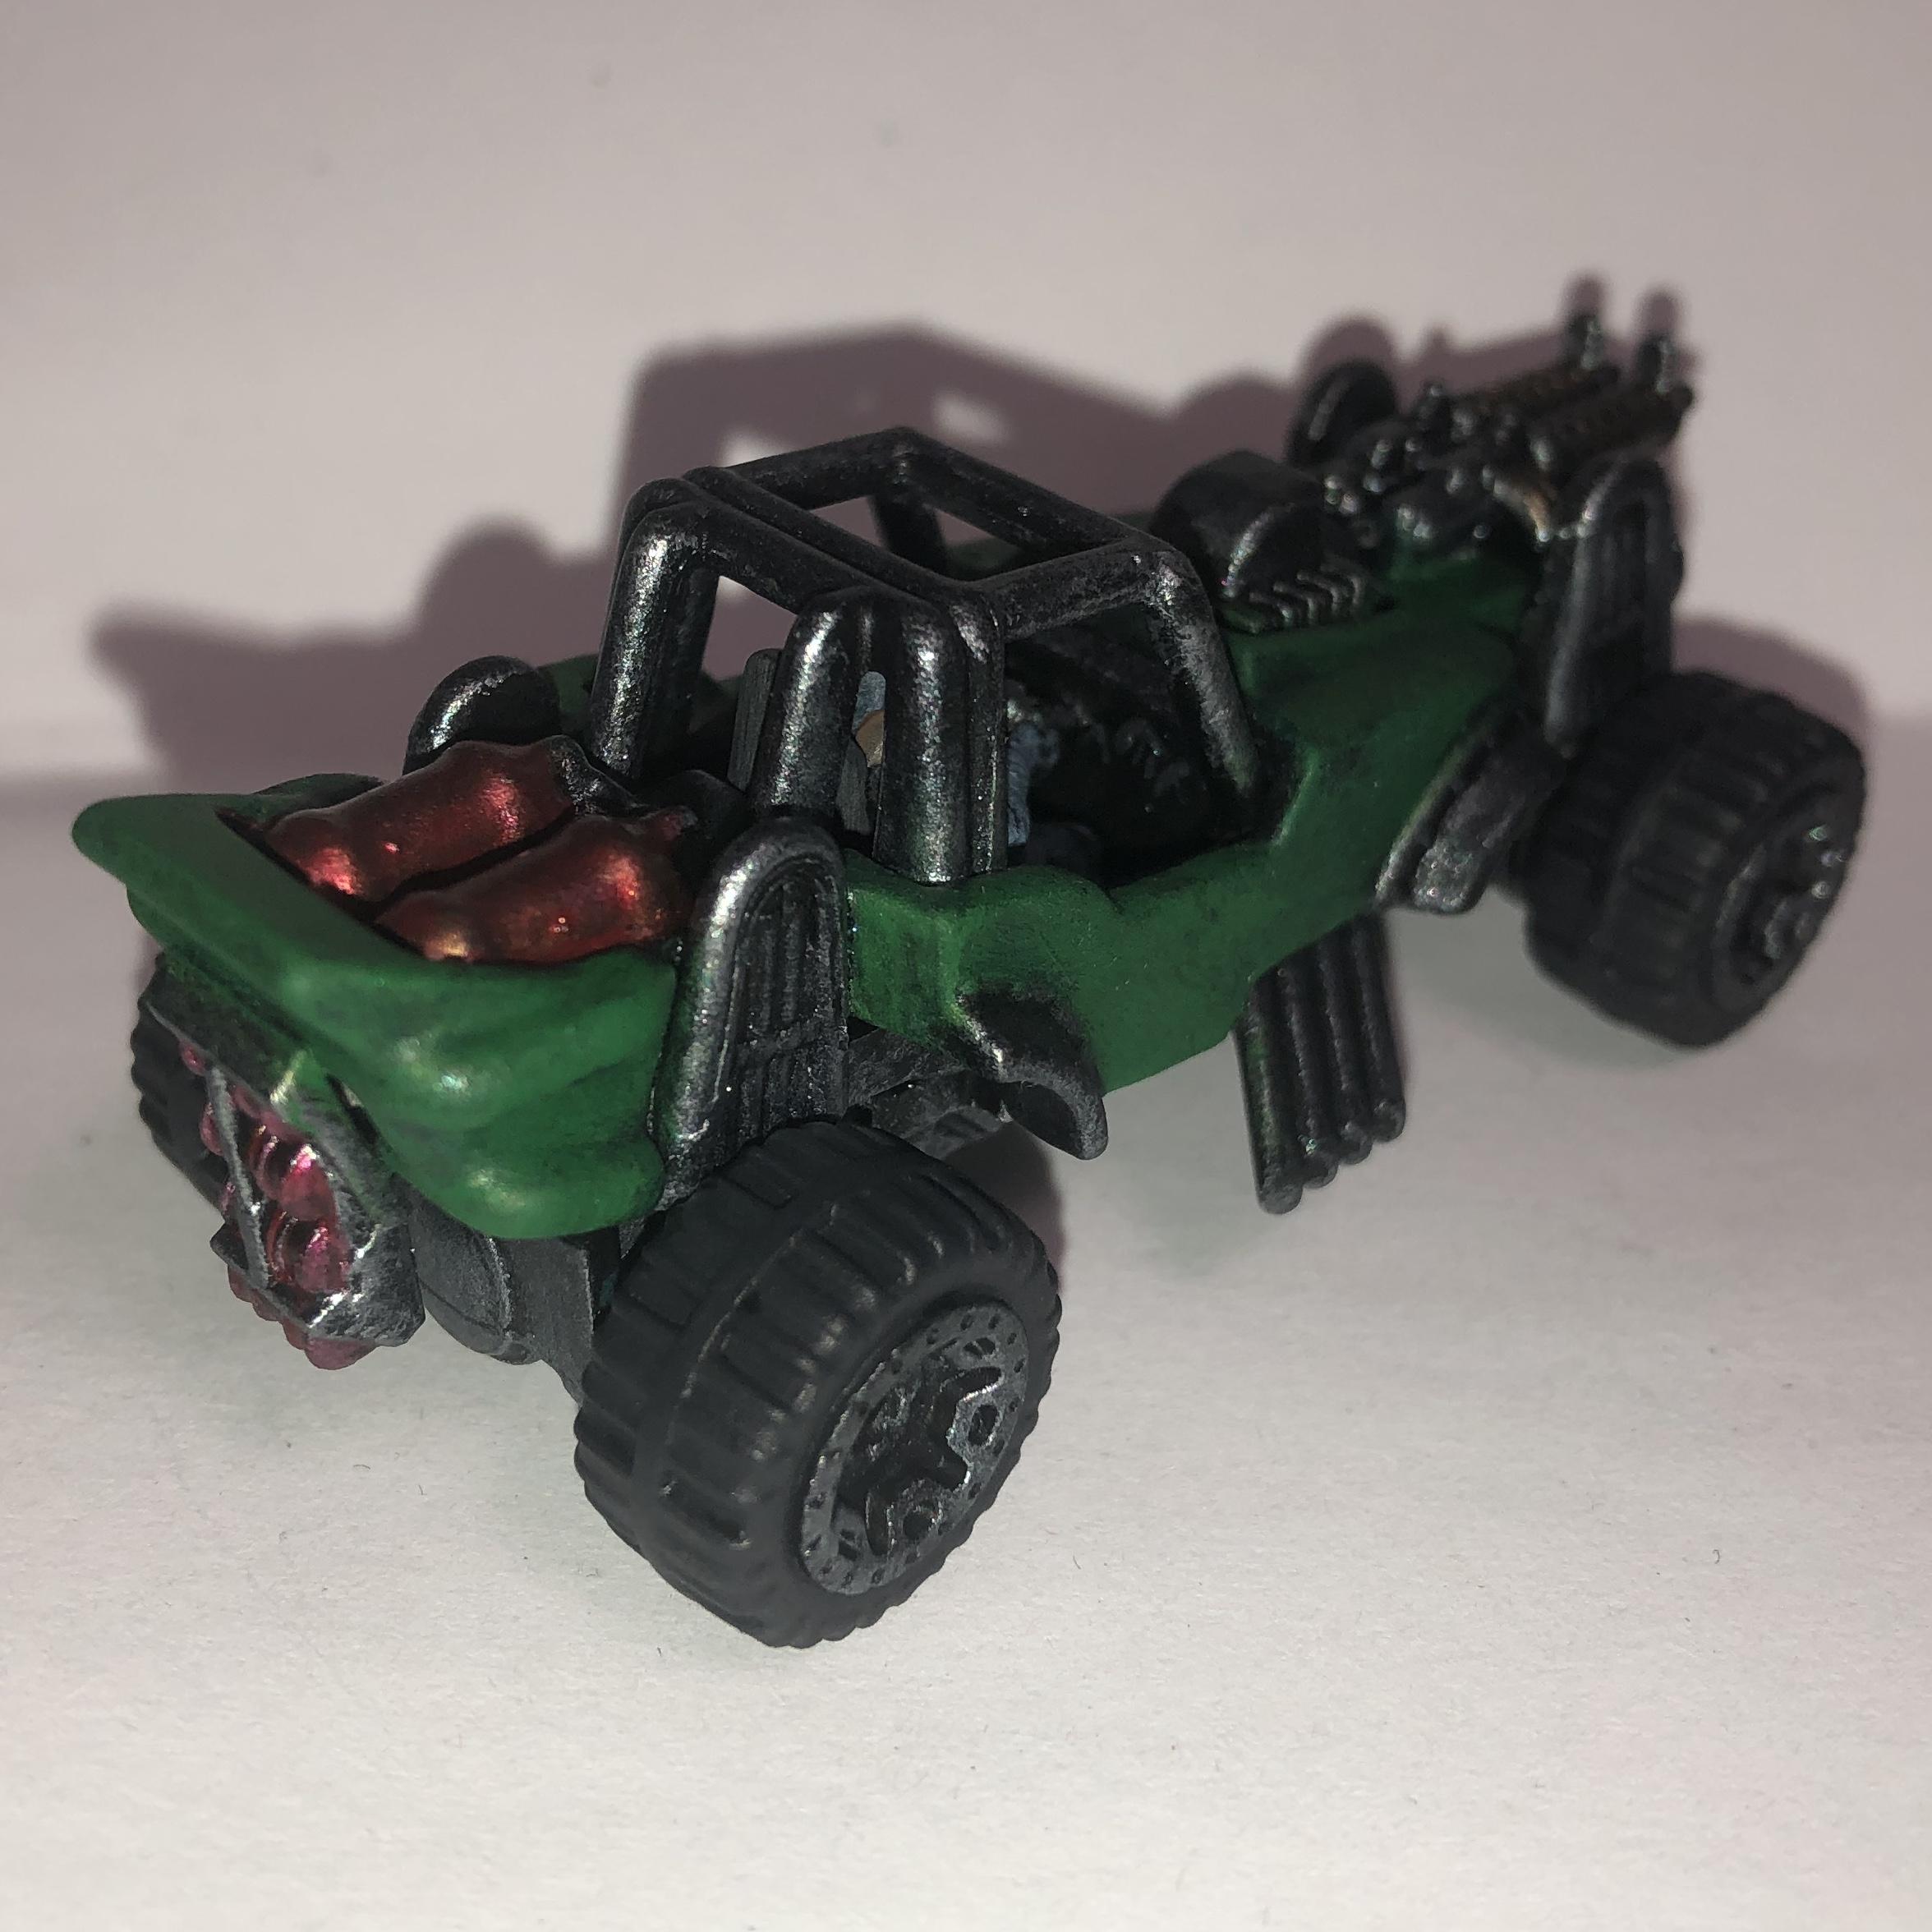 Buggy, Cars, Conversion, Gaslands, Mad Max, Post Apocalyptic